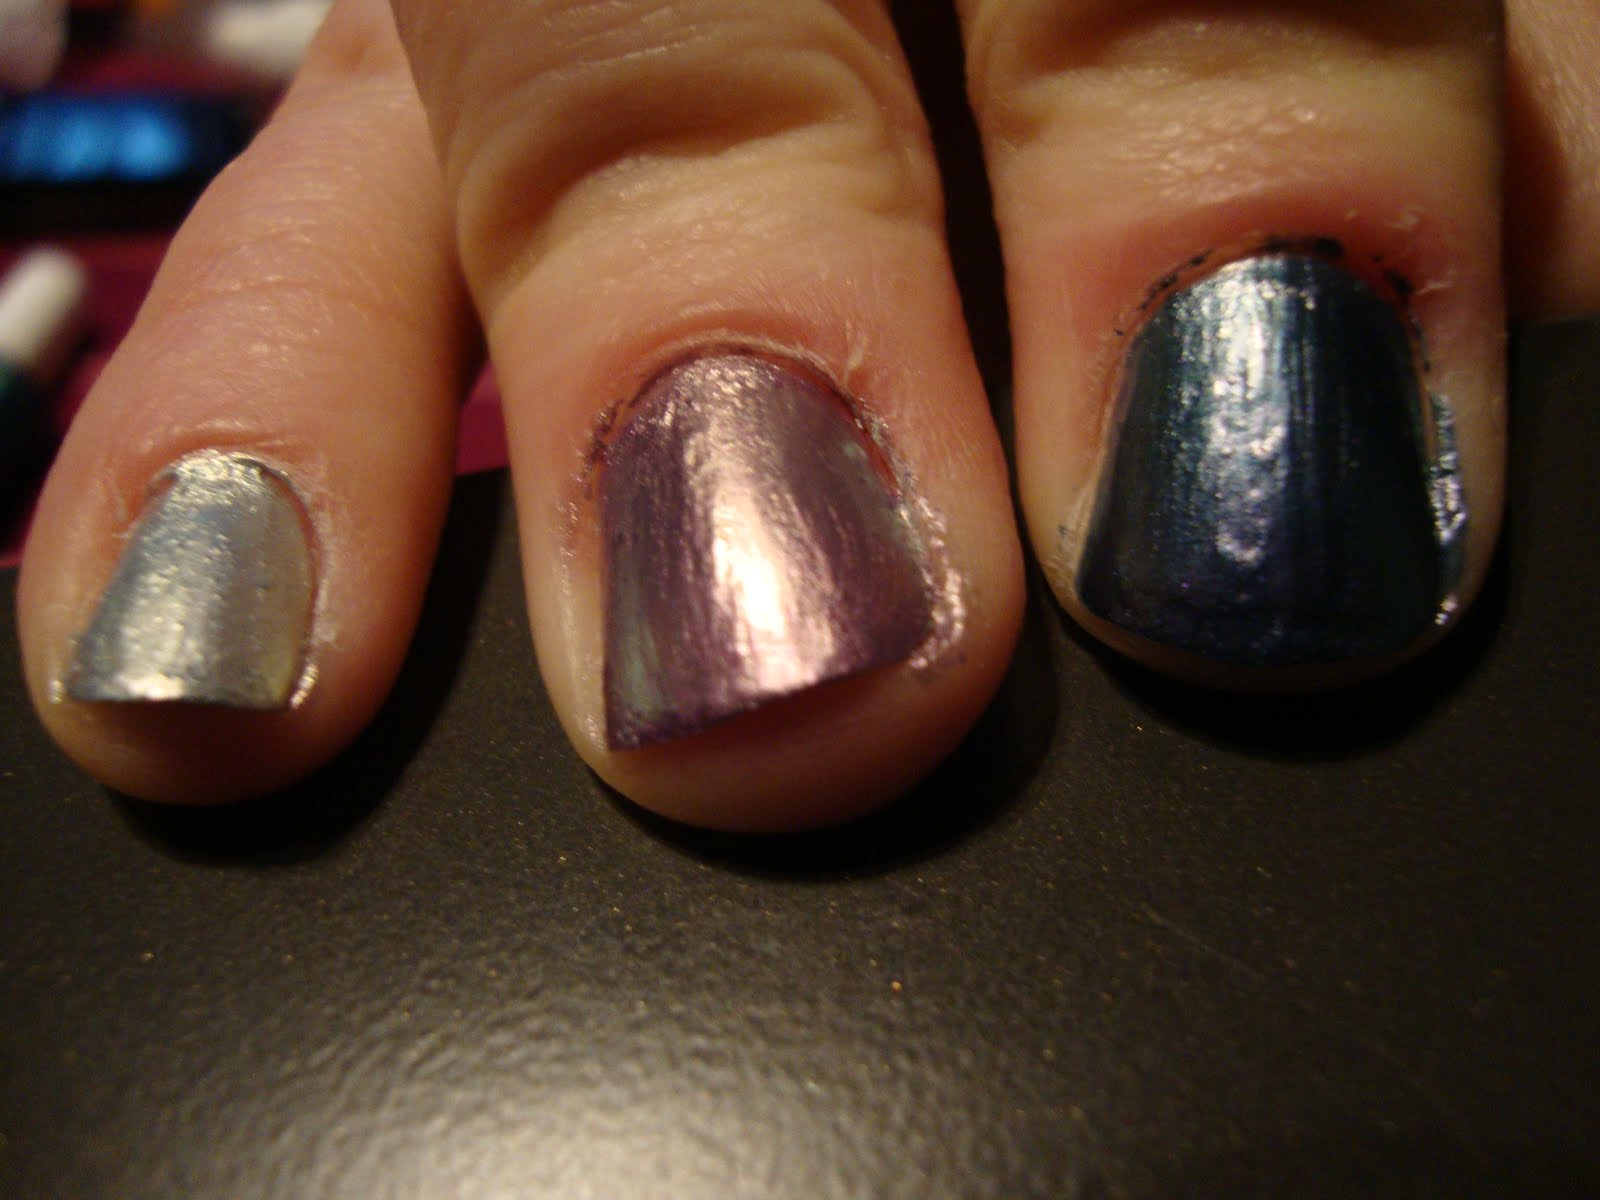 10. Butter London Nail Lacquer in "Chameleon" - wide 6